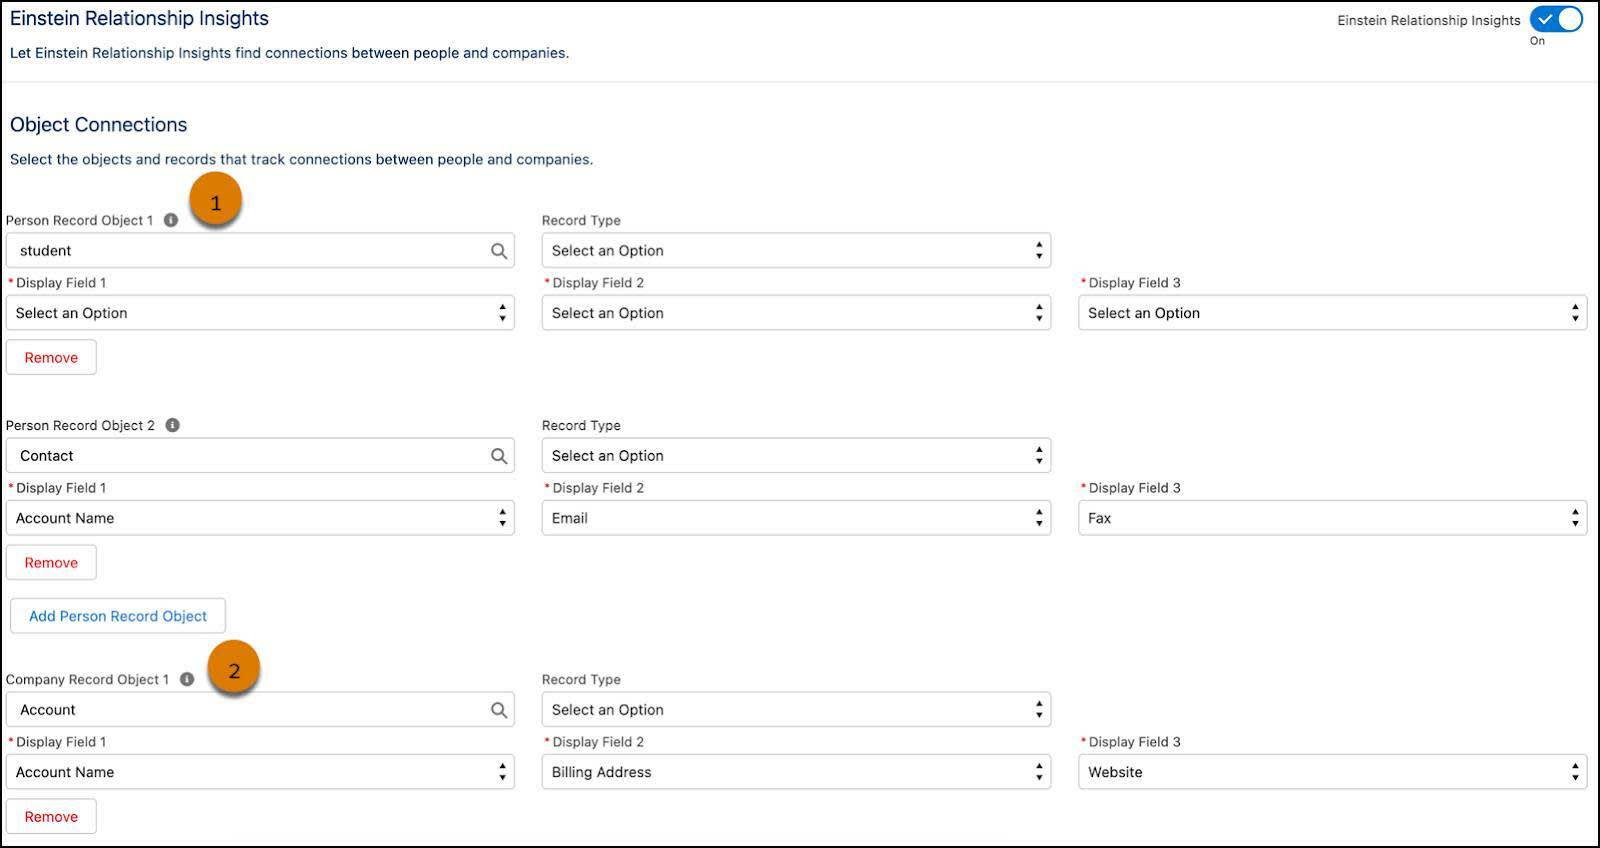 Einstein Relationship Insights Configuration page showing object connections